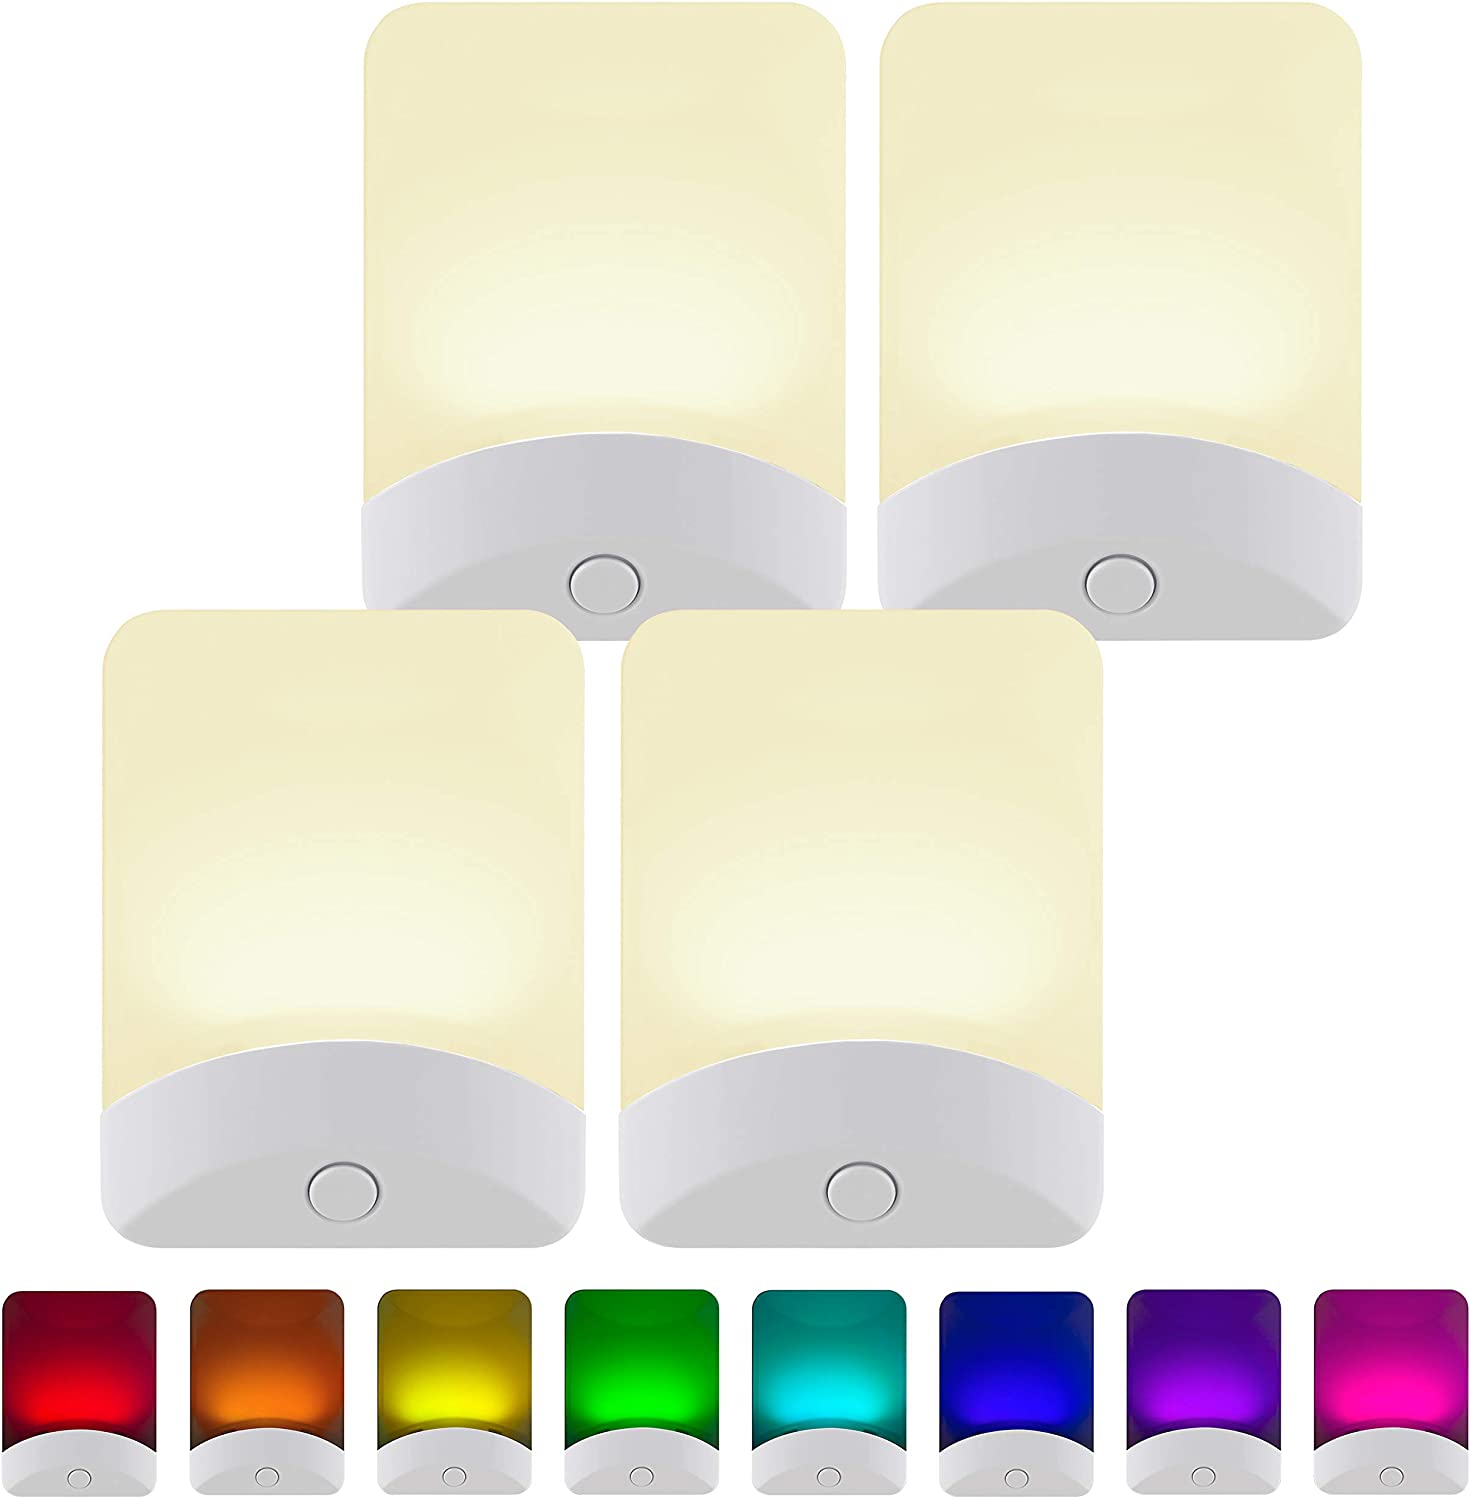 GE White Color-Changing LED Night Light, 4 Pack, Plug-in, Dusk-to-Dawn, Home Décor, UL-Listed, Ideal for Bedroom, Bathroom, Nursery, Kitchen, 50860, 4